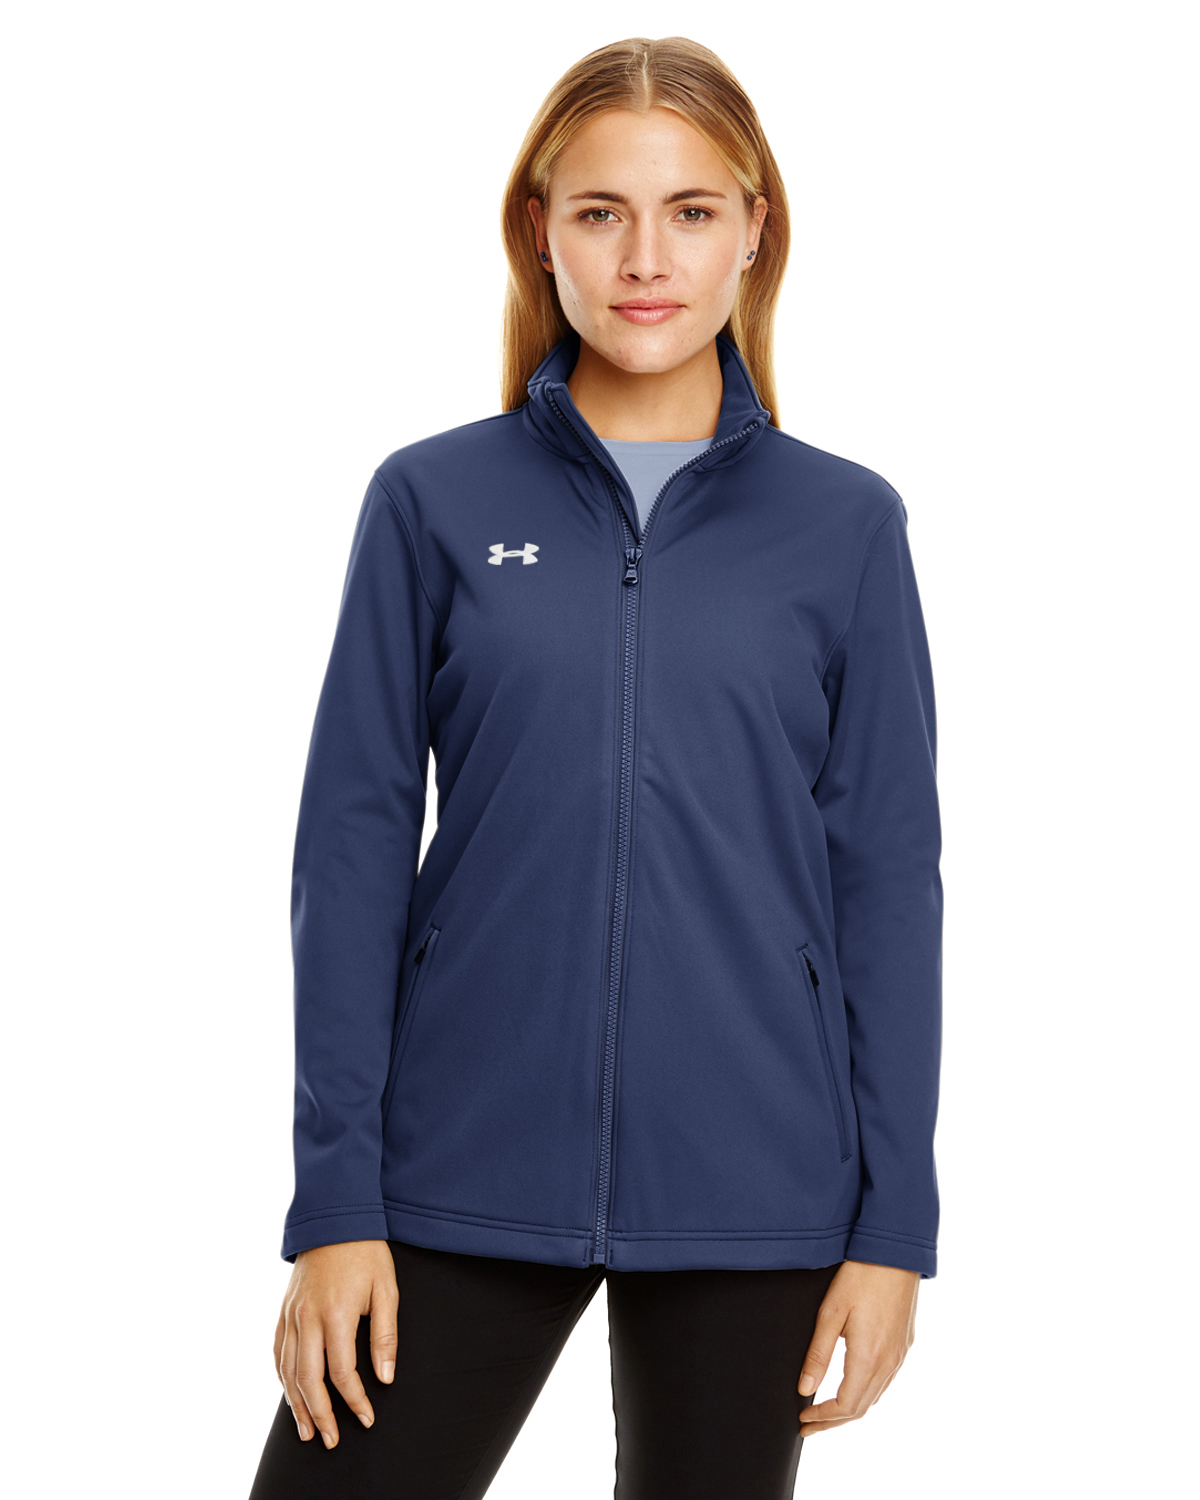 Under Armour Women's Ultimate Team Jacket